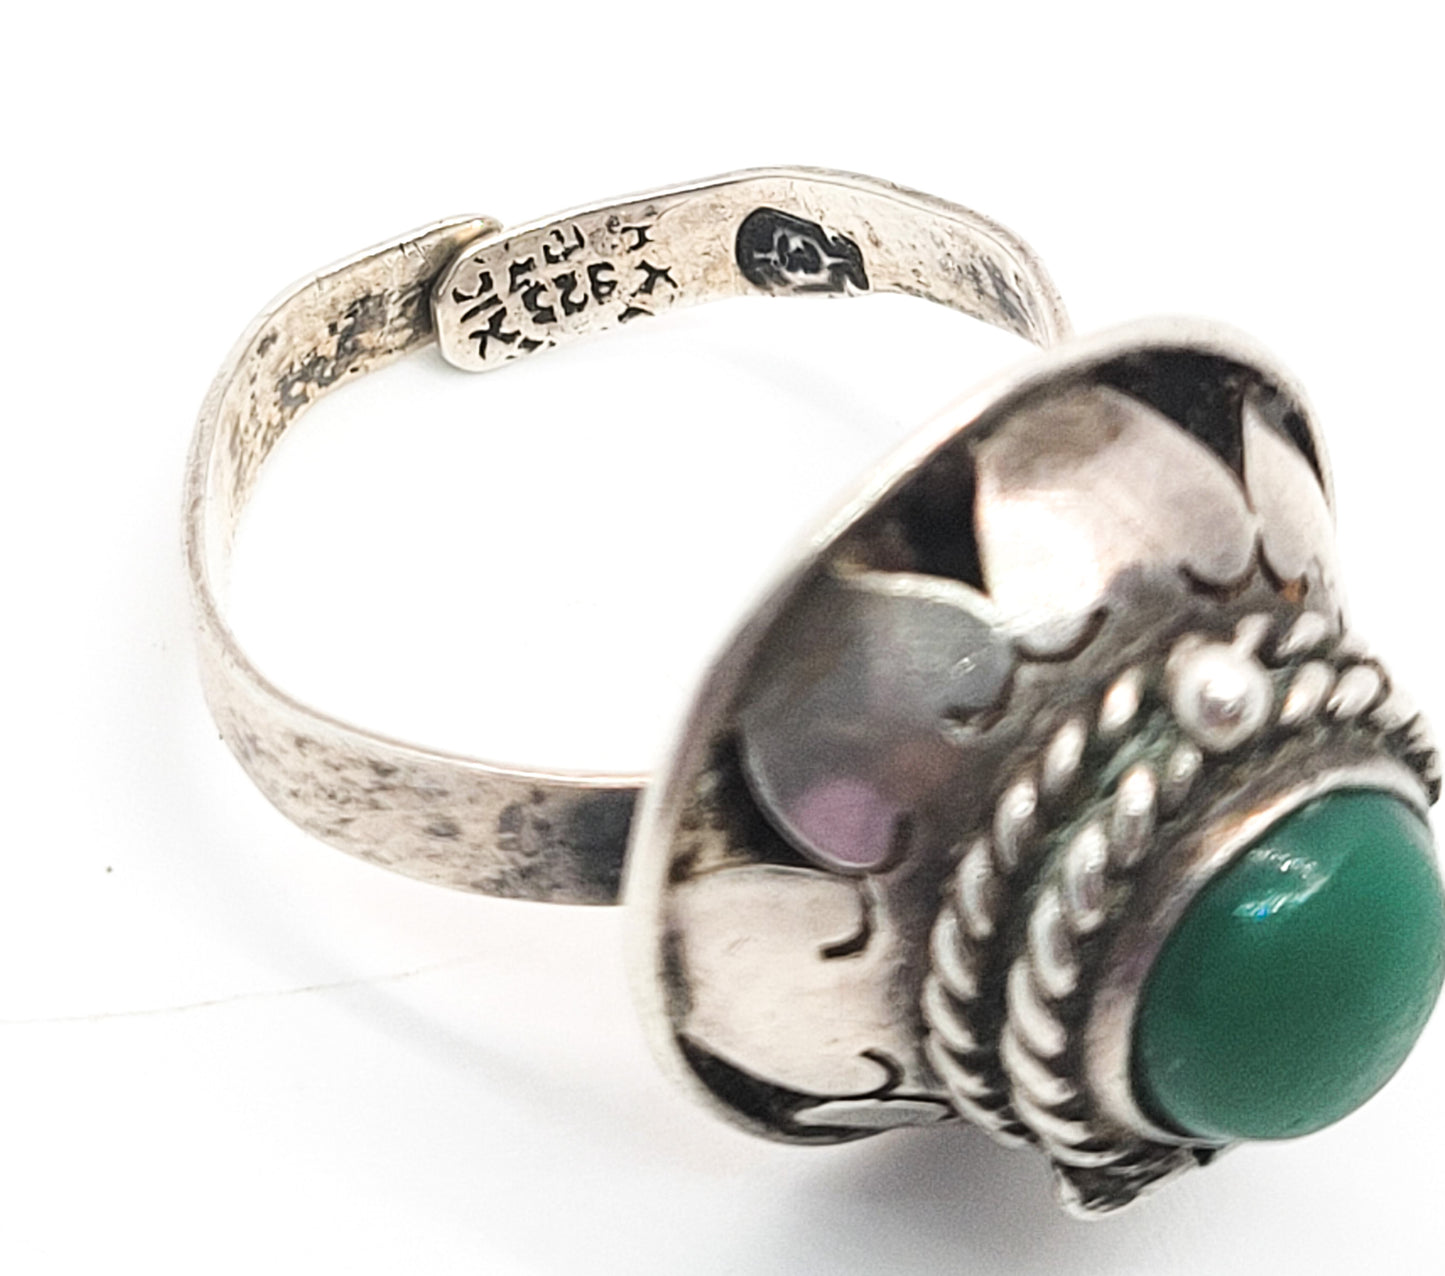 Poison Ring vintage Taxco Mexico green gemstone sterling silver eagle mark ring adjustable